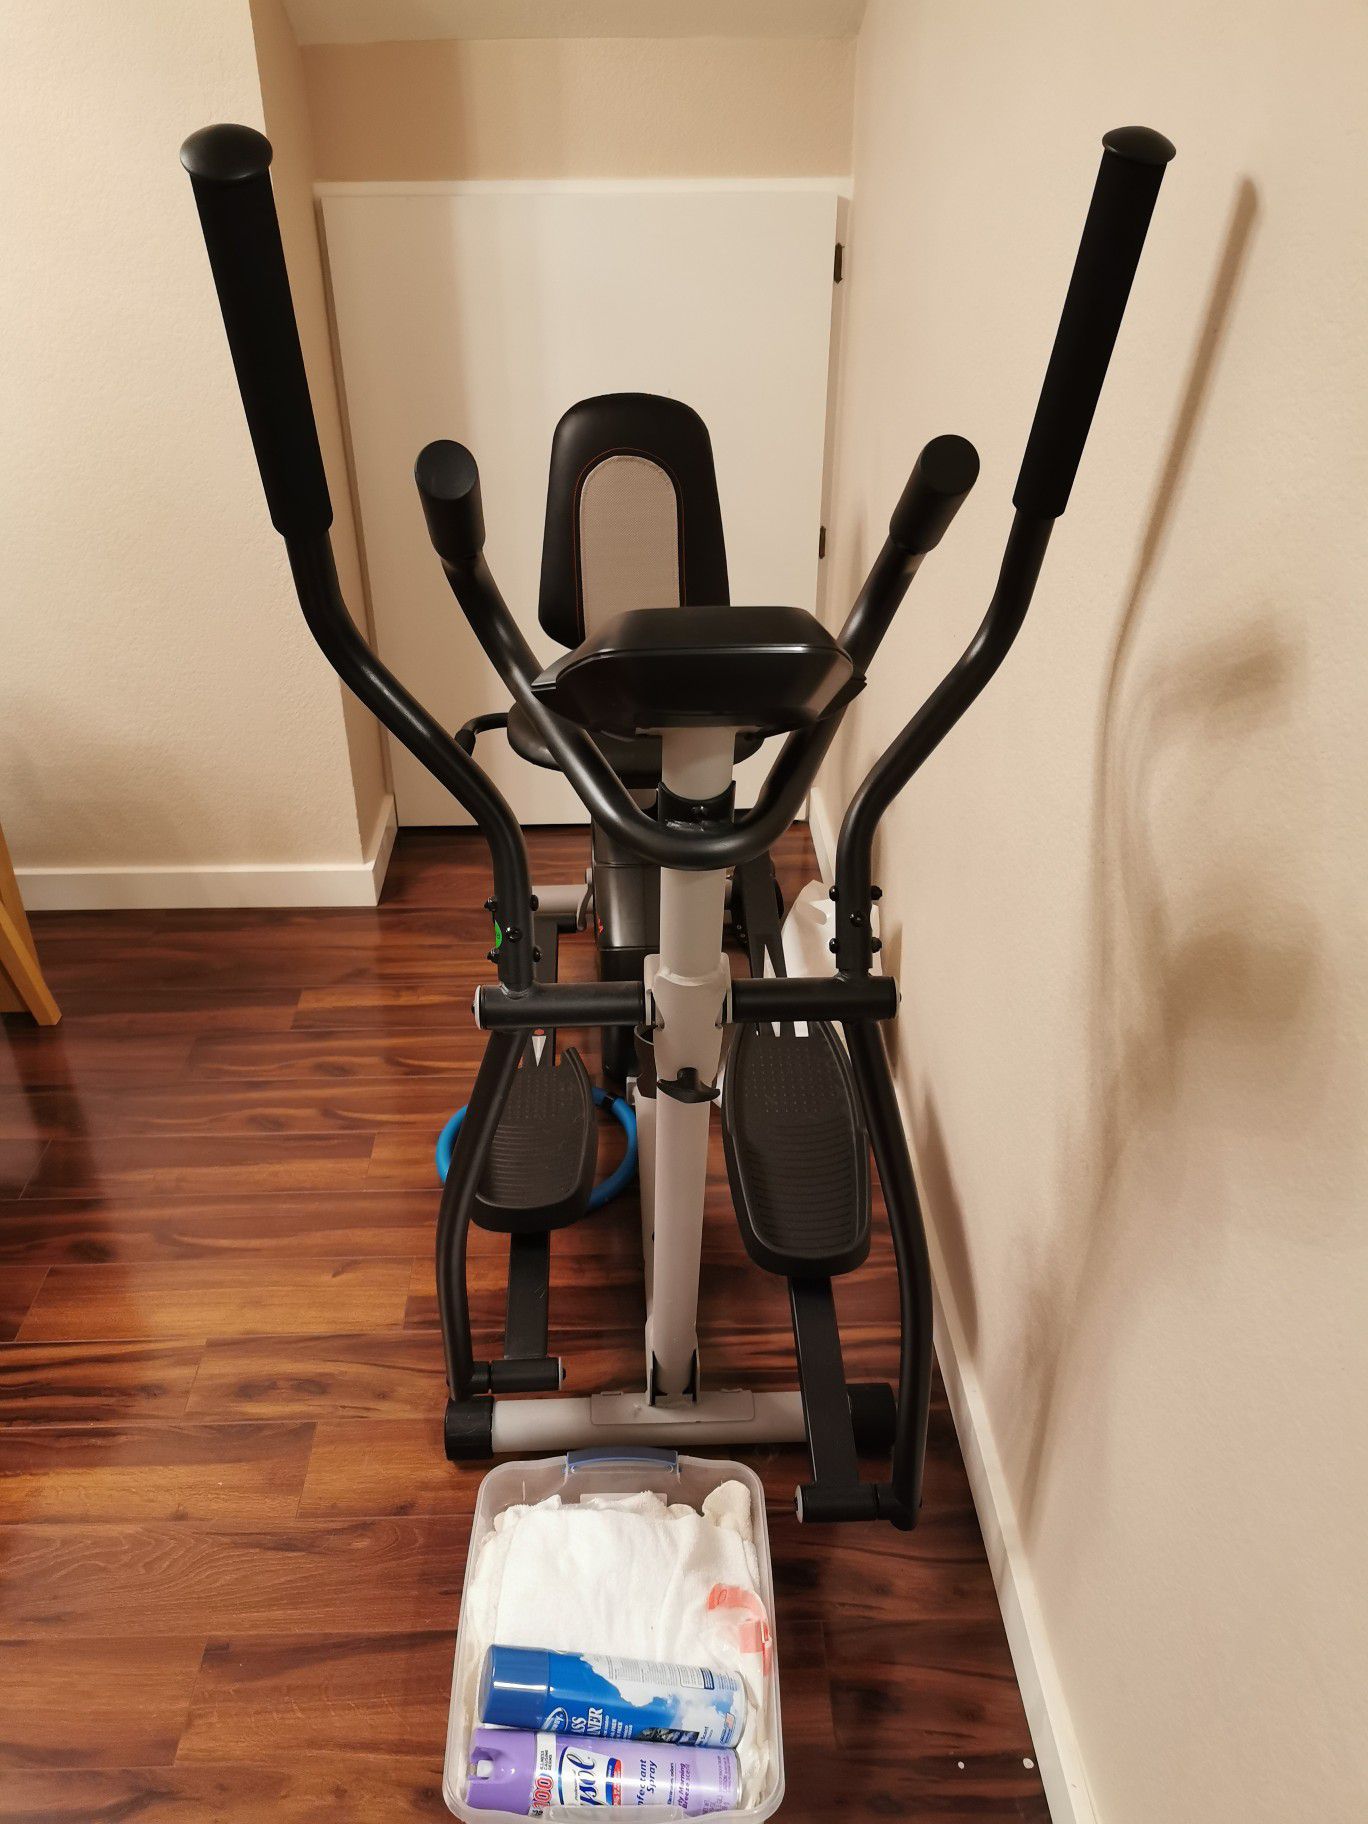 bike exercise machine and back pain solution